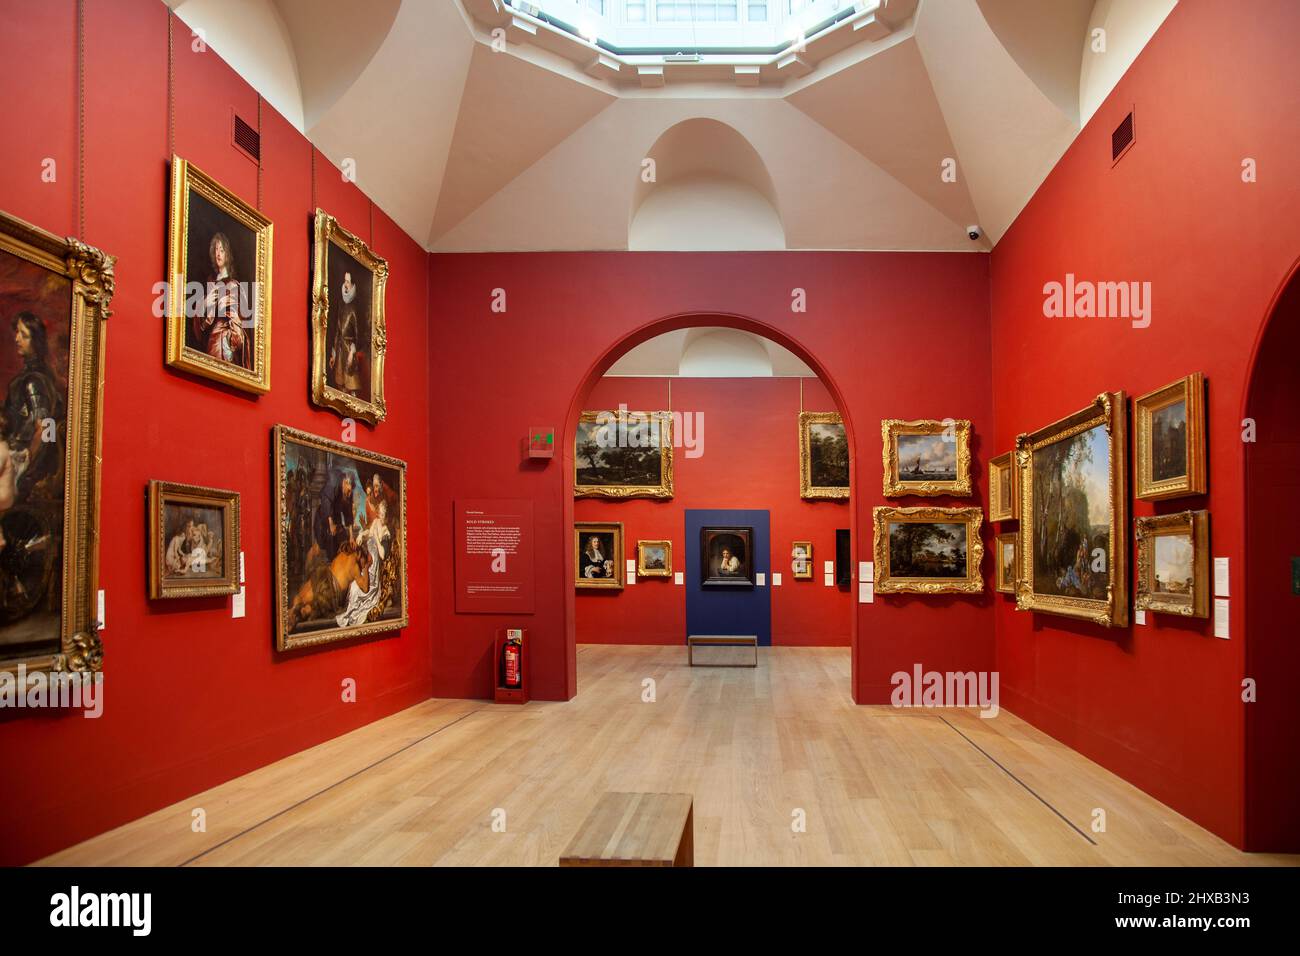 Dulwich Gallery Interior Permanent Collection , London UK Stock Photo